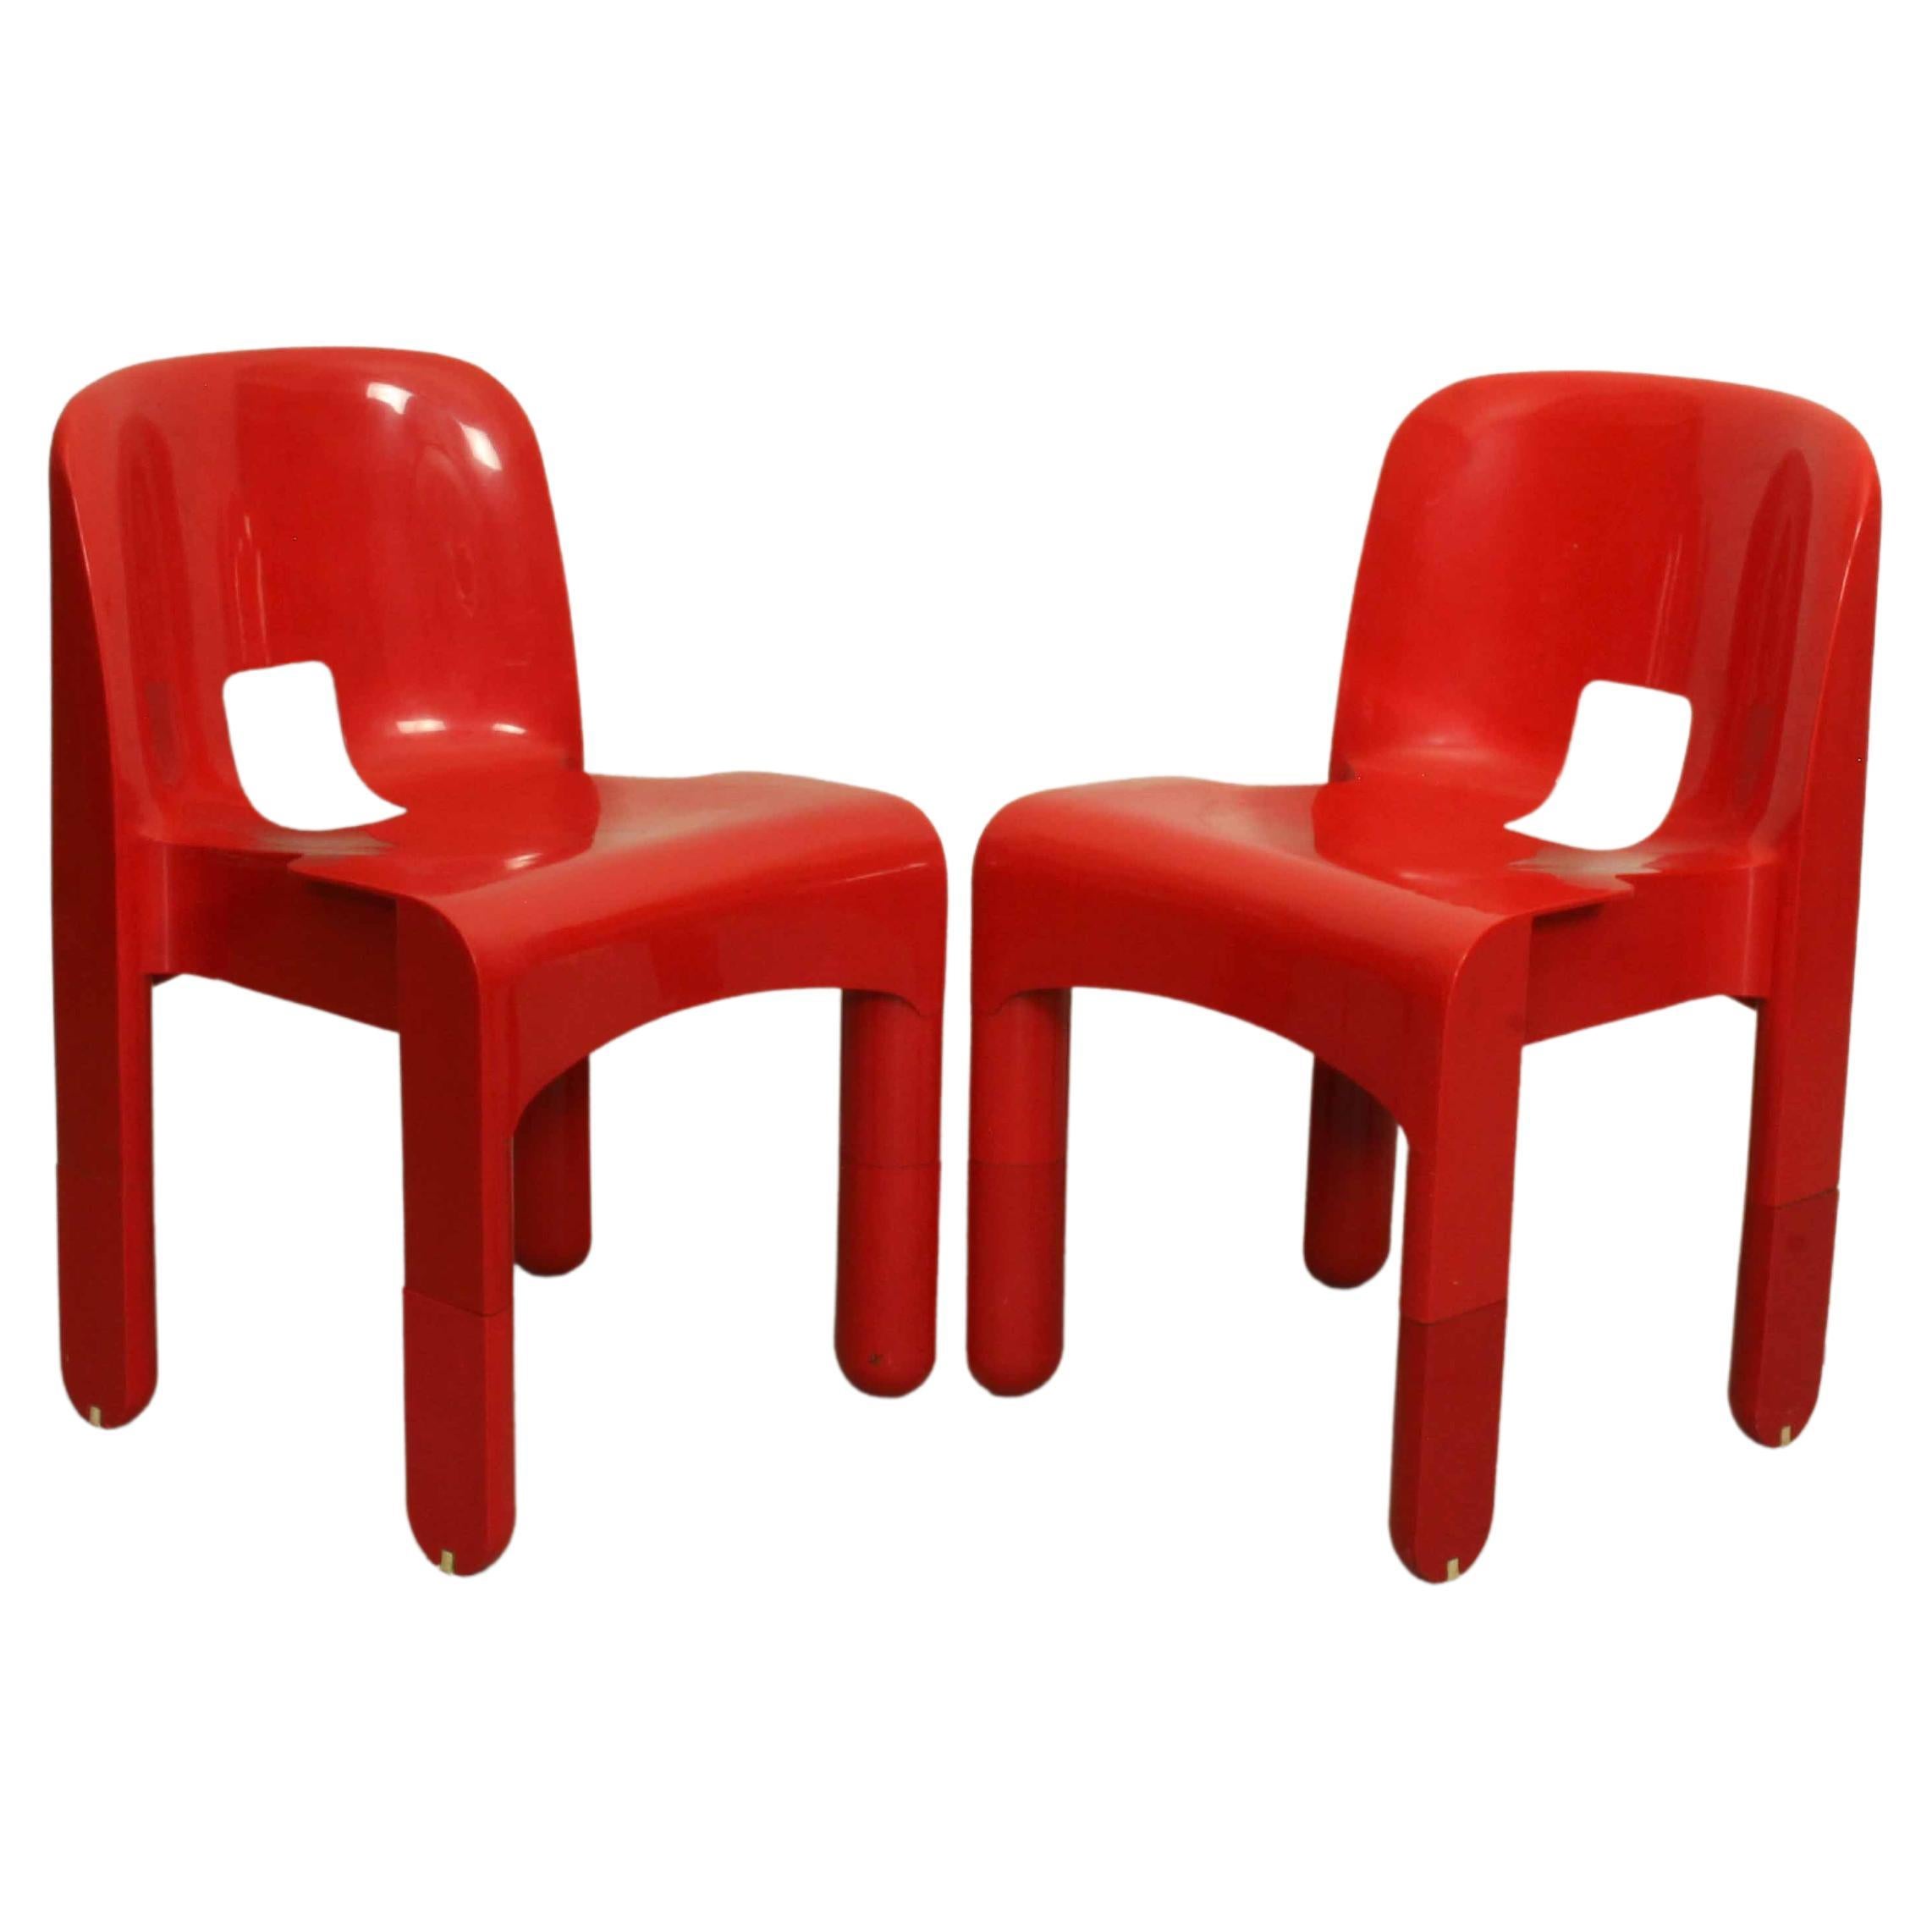 Red Joe Colombo Universale Plastic Chair by Kartell, Italy, 1967